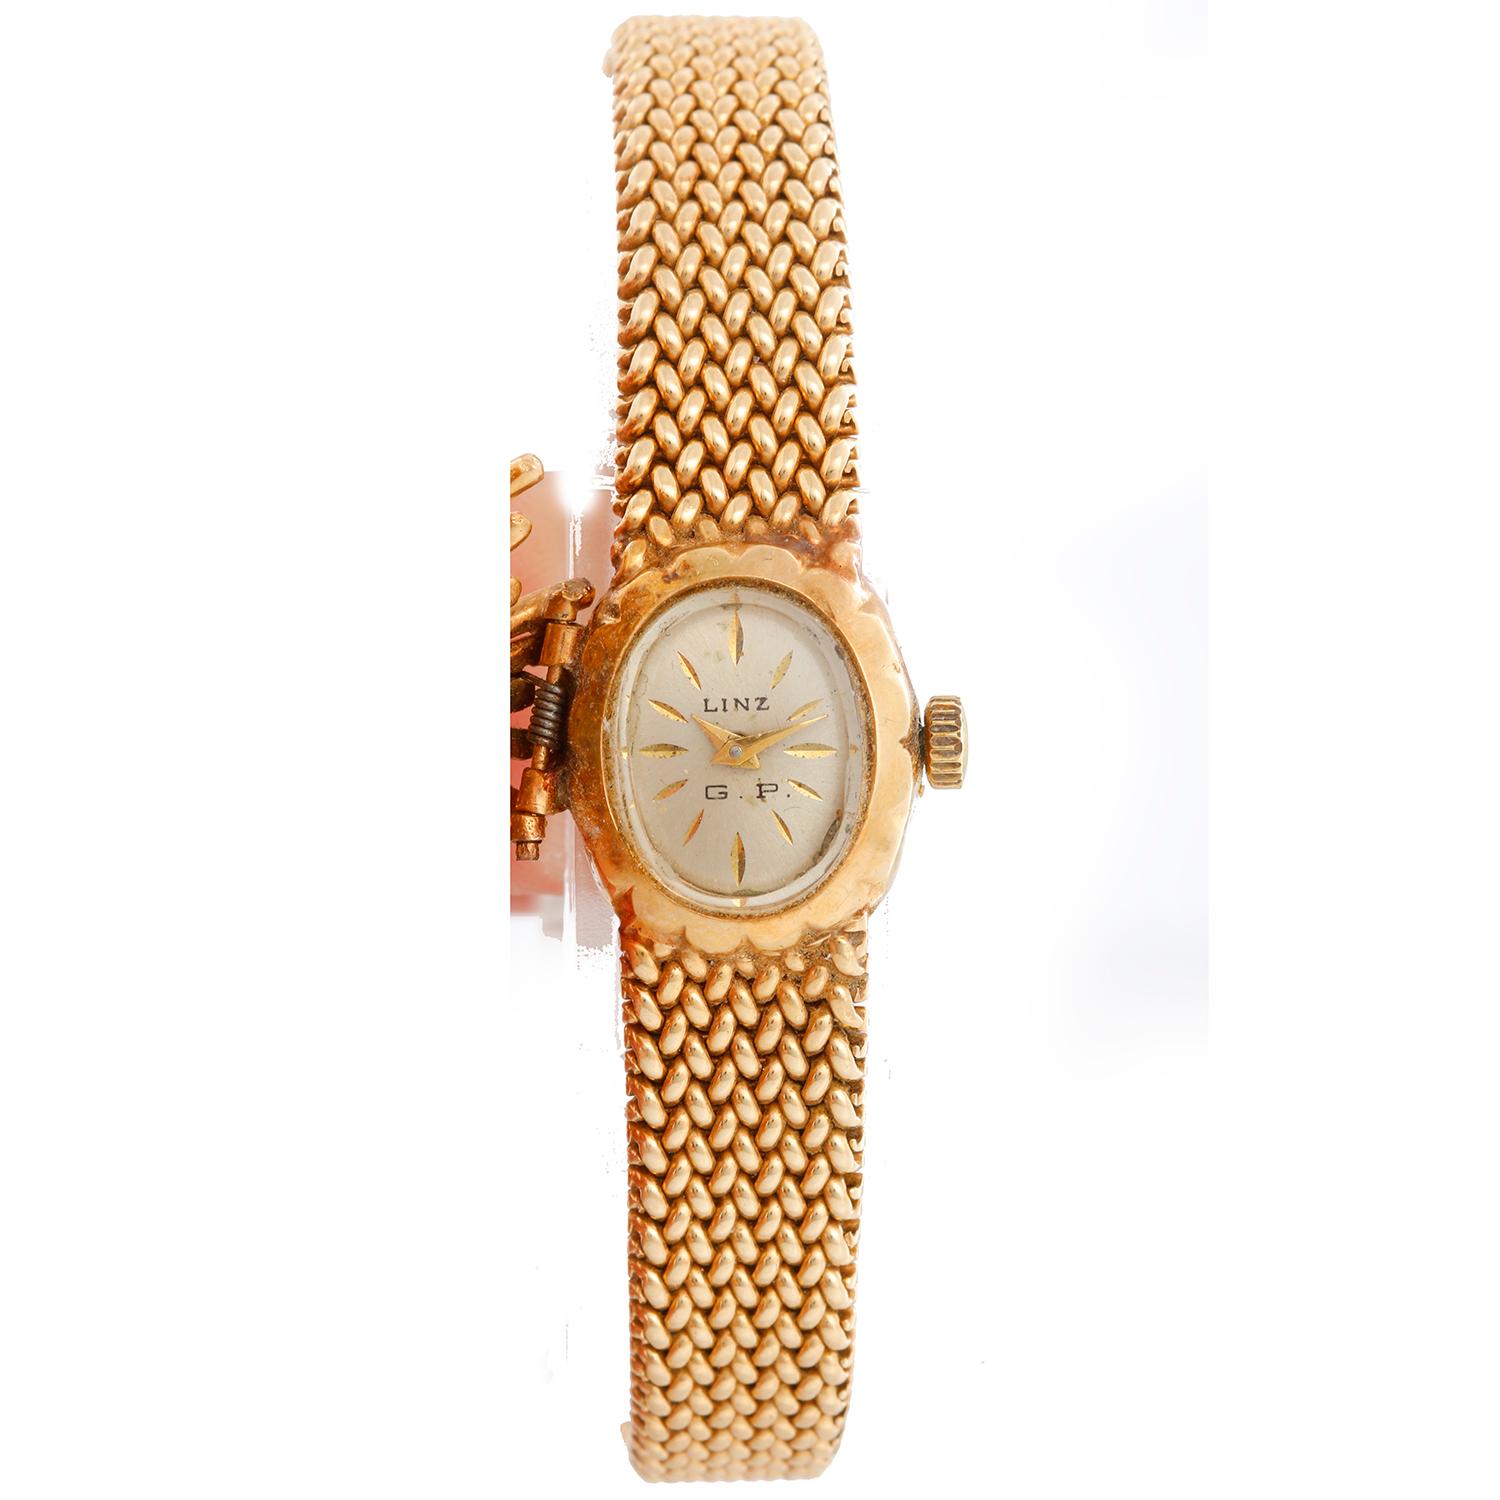 Linz 14K Yellow Gold Vintage Watch - Manual winding. 14K yellow gold with a diamond case ( 22 x 32mm ). Silver dial with gold hour markers . 14K Yellow gold bracelet; will fit up to a 6 1/2 inch wrist. Pre-owned with custom box.